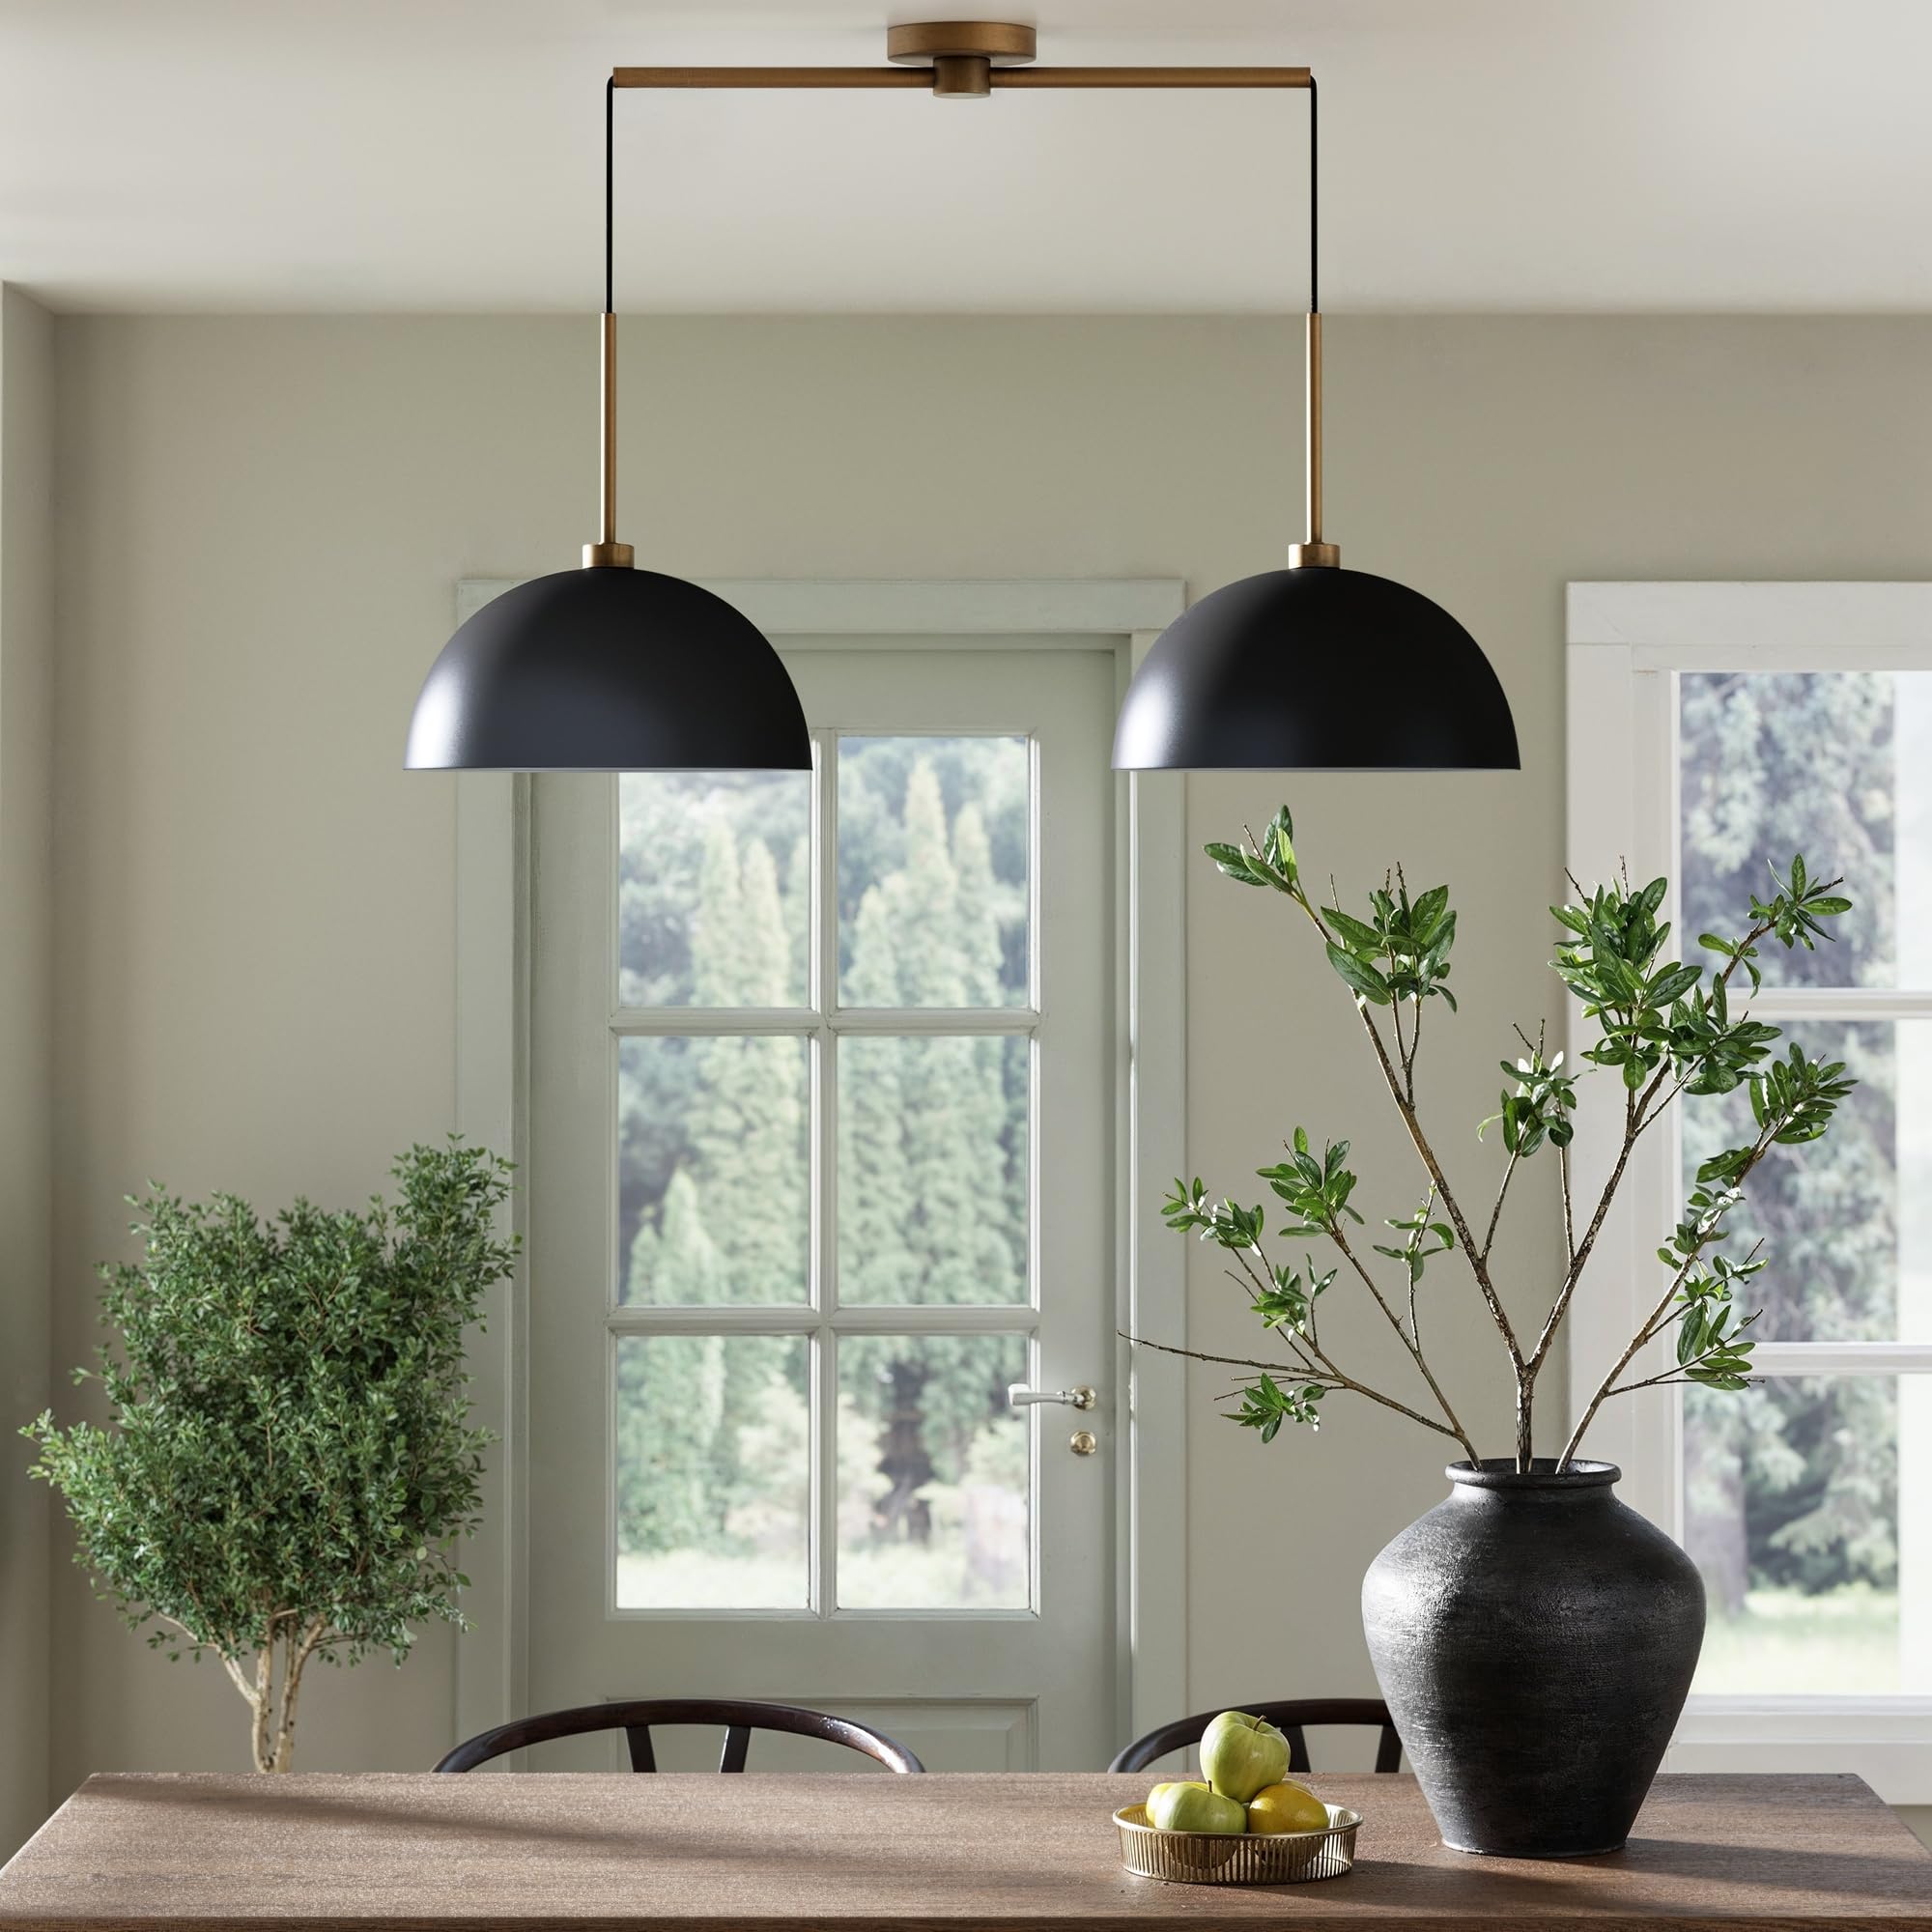 Nathan James Percy Modern 2-Light Pendant Island Light Fixture, Hanging Lights with Metal Shade and Adjustable Cord, for Kitchen, Living Room, Black/Vintage Brass